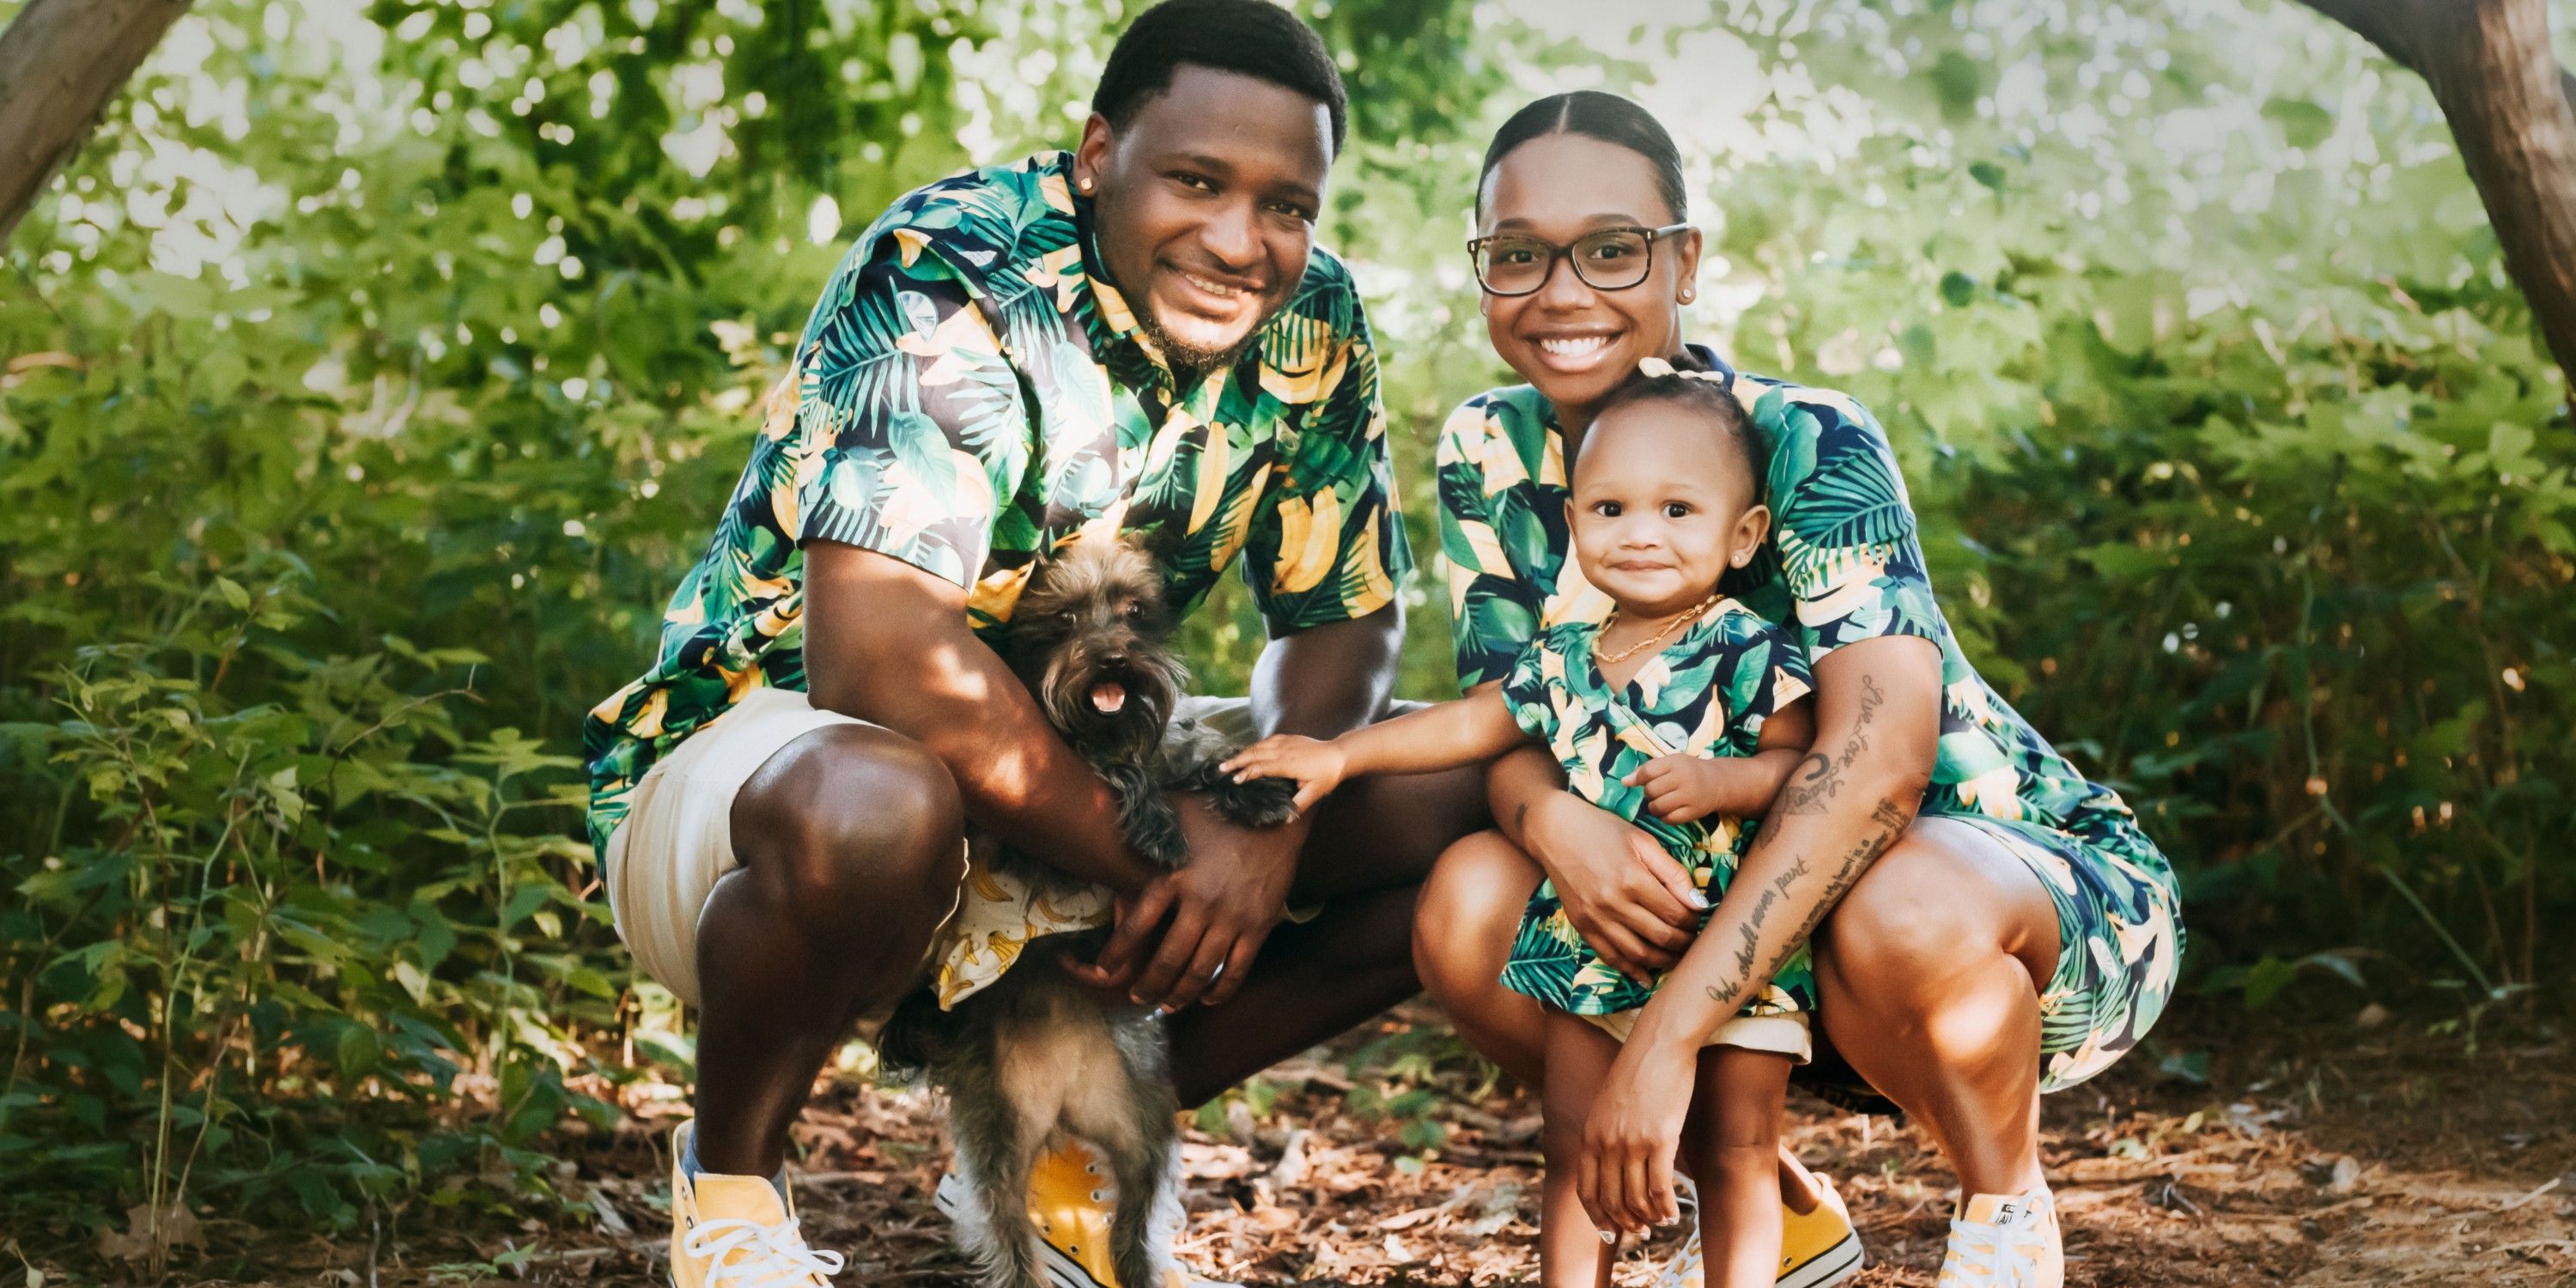 Married At First Sight's Jephte and Shawniece taking photos with their daughter and dog